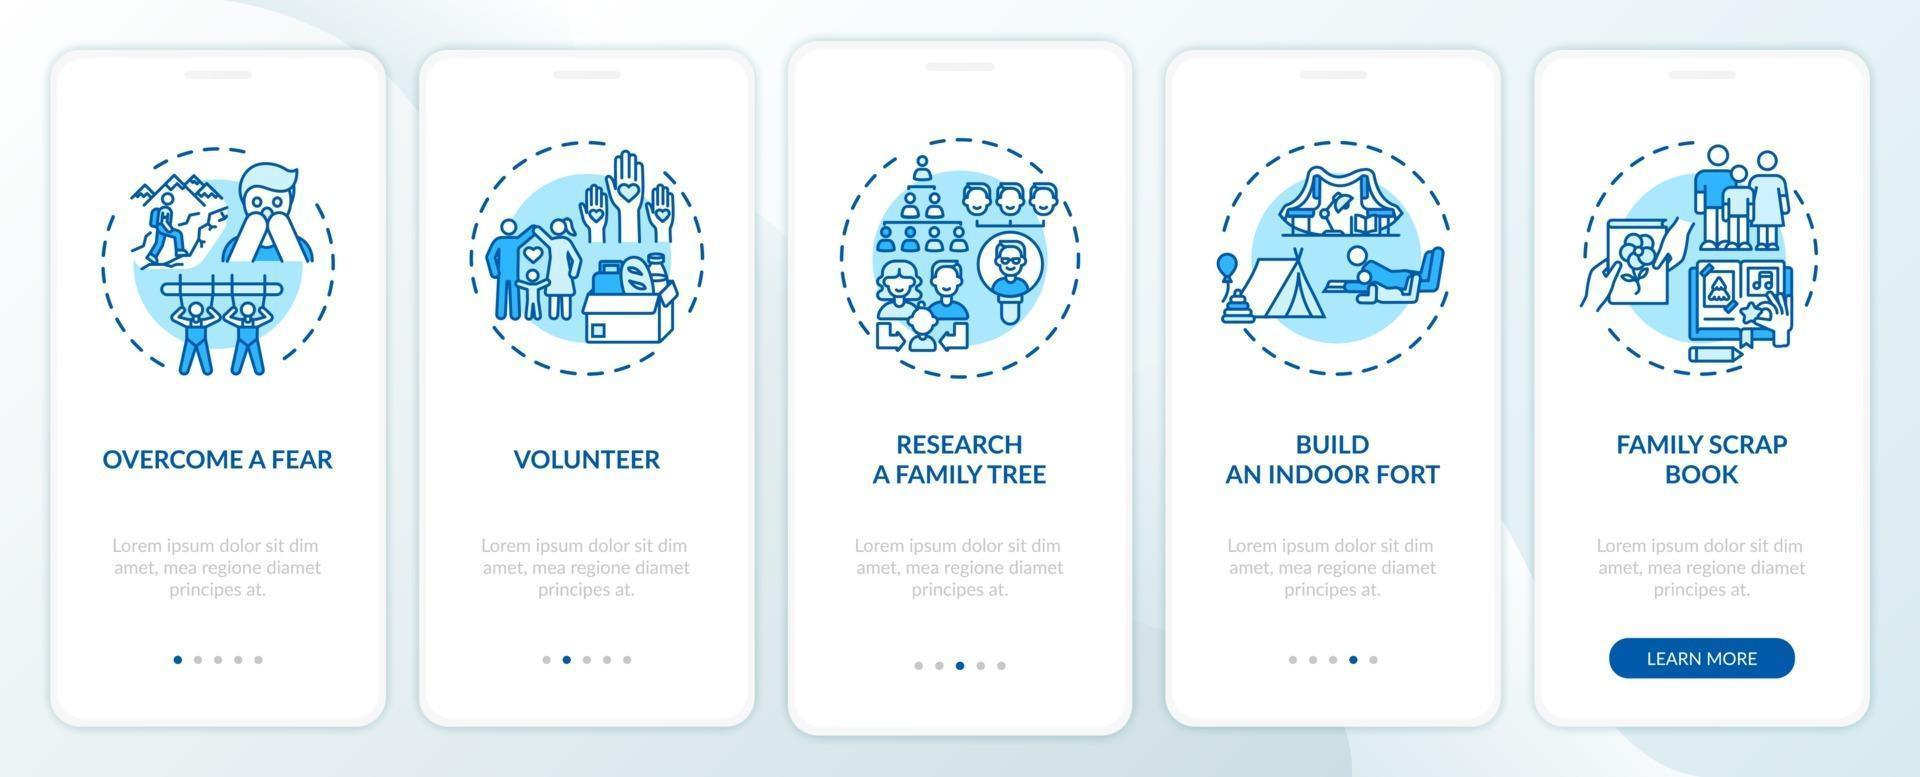 Family bonding tips onboarding mobile app page screen with concepts vector